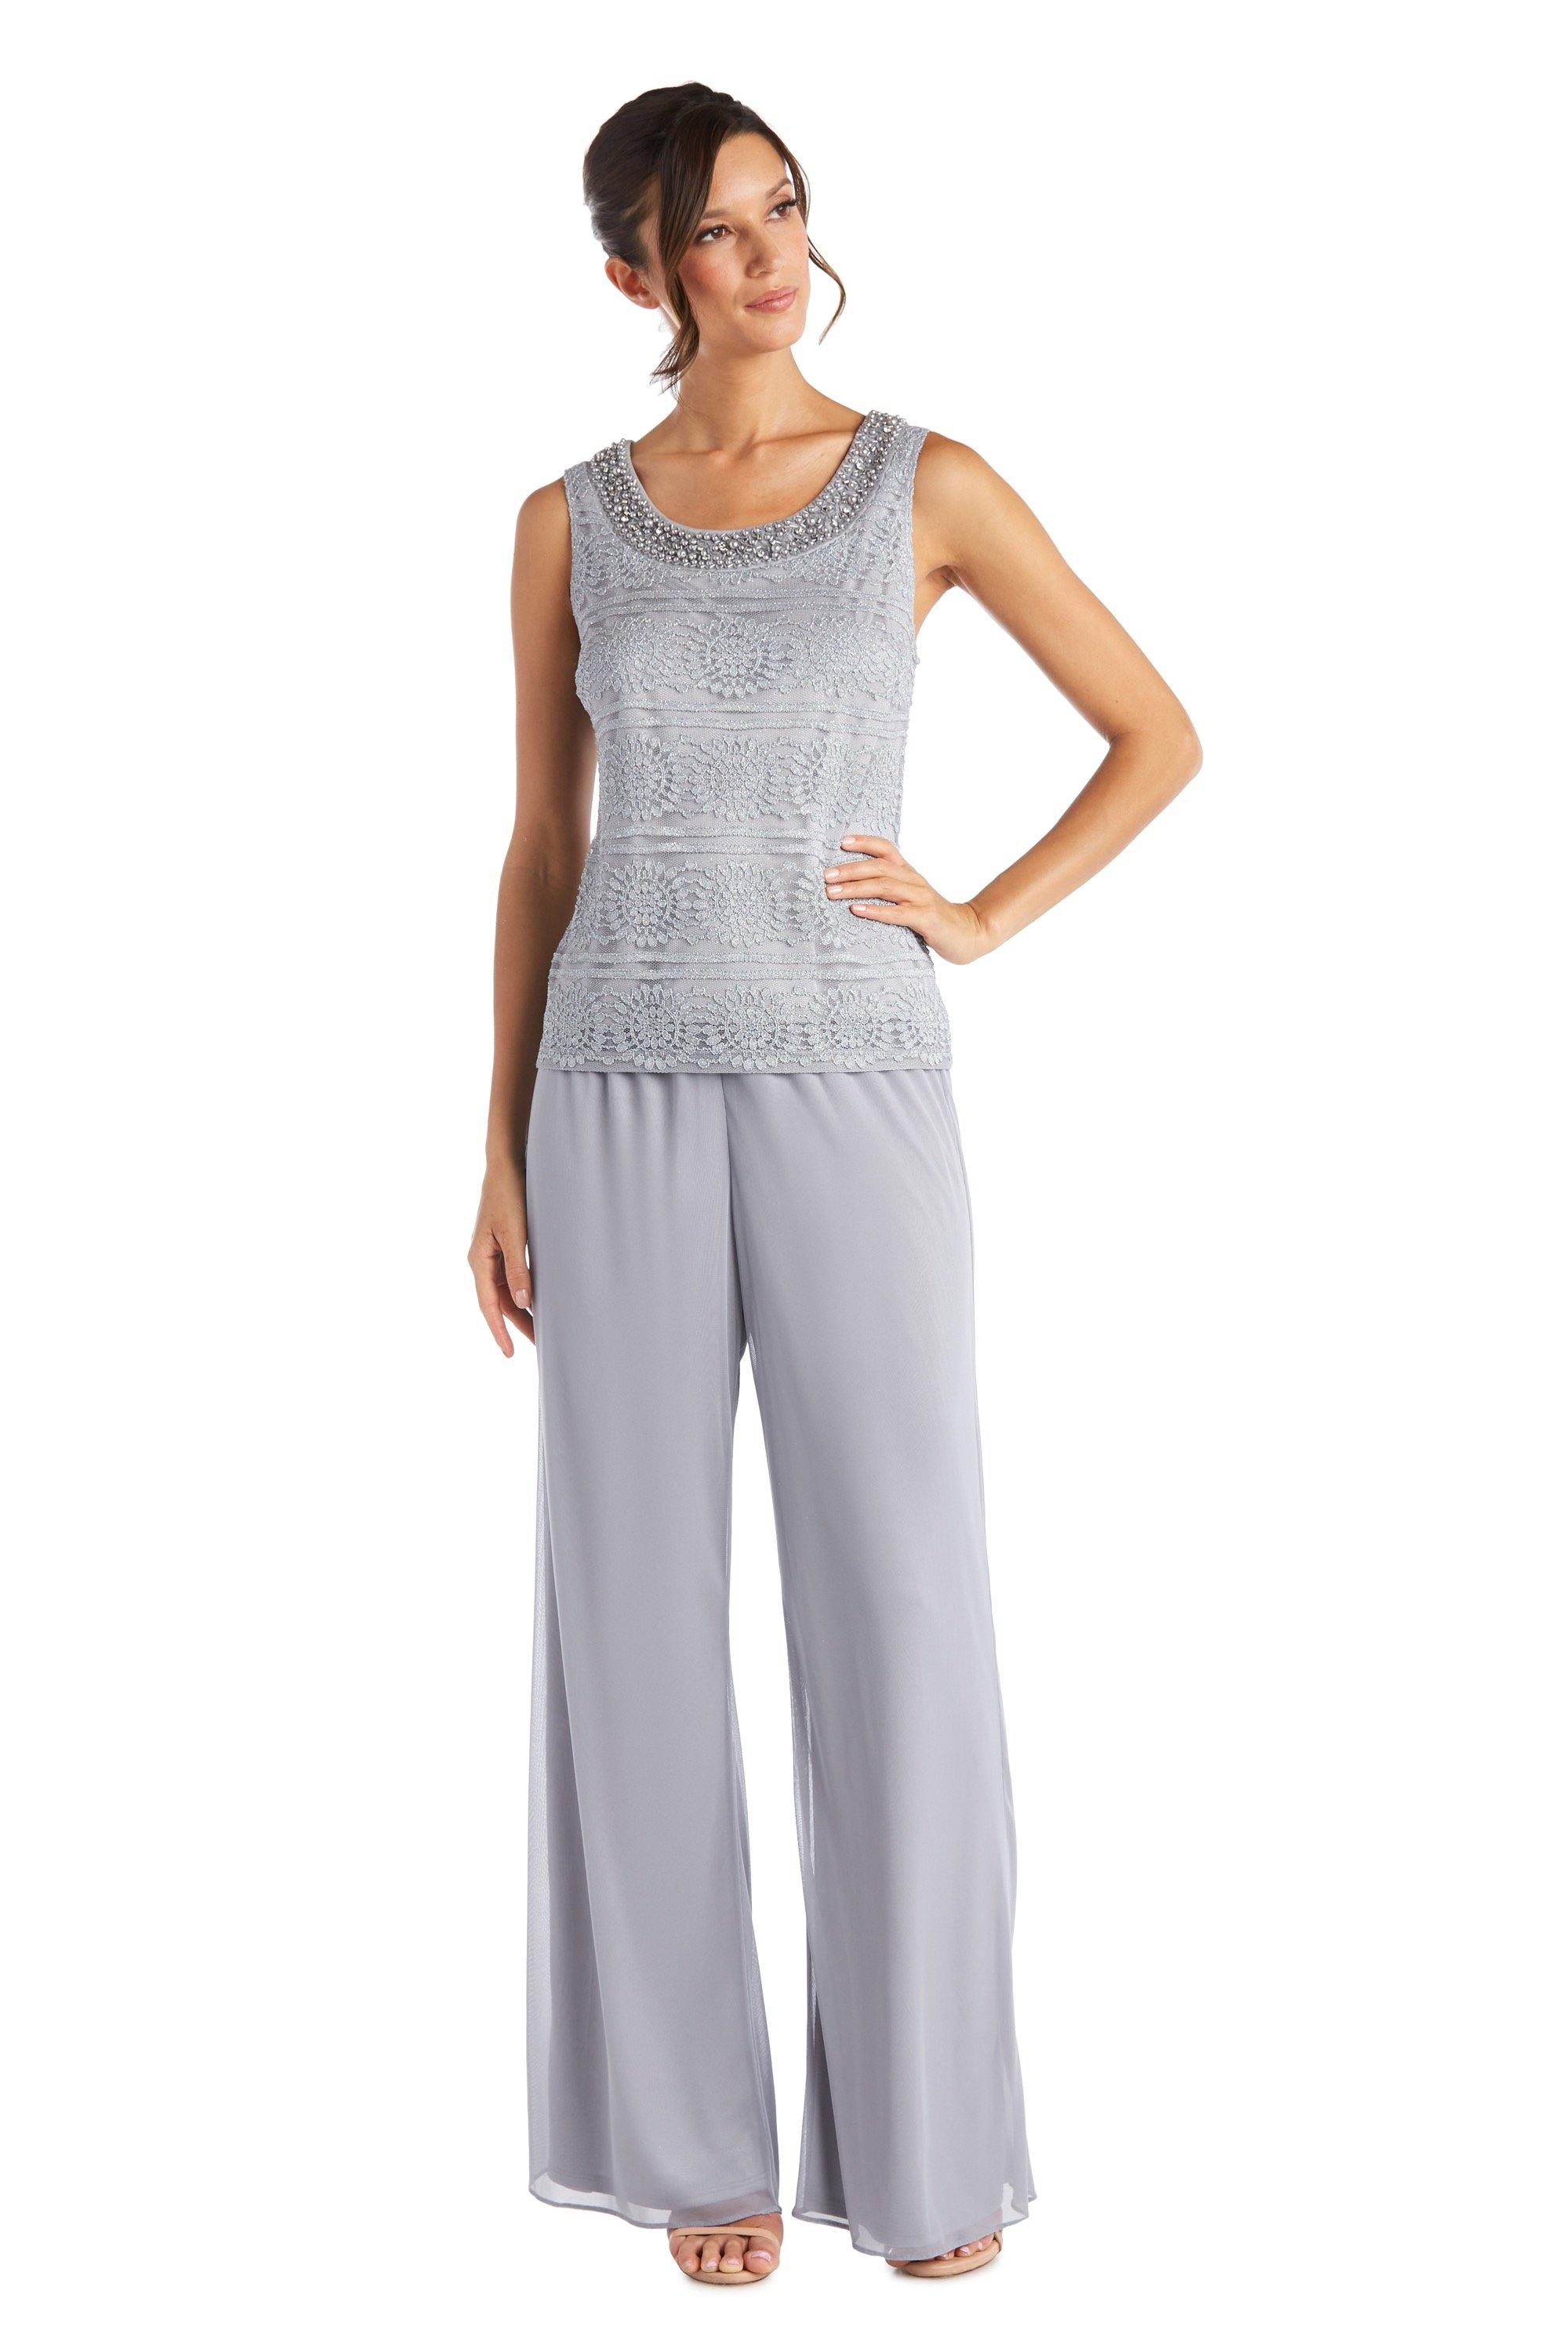 R&M Richards Long Formal Beaded Pant Suit 7008 - The Dress Outlet